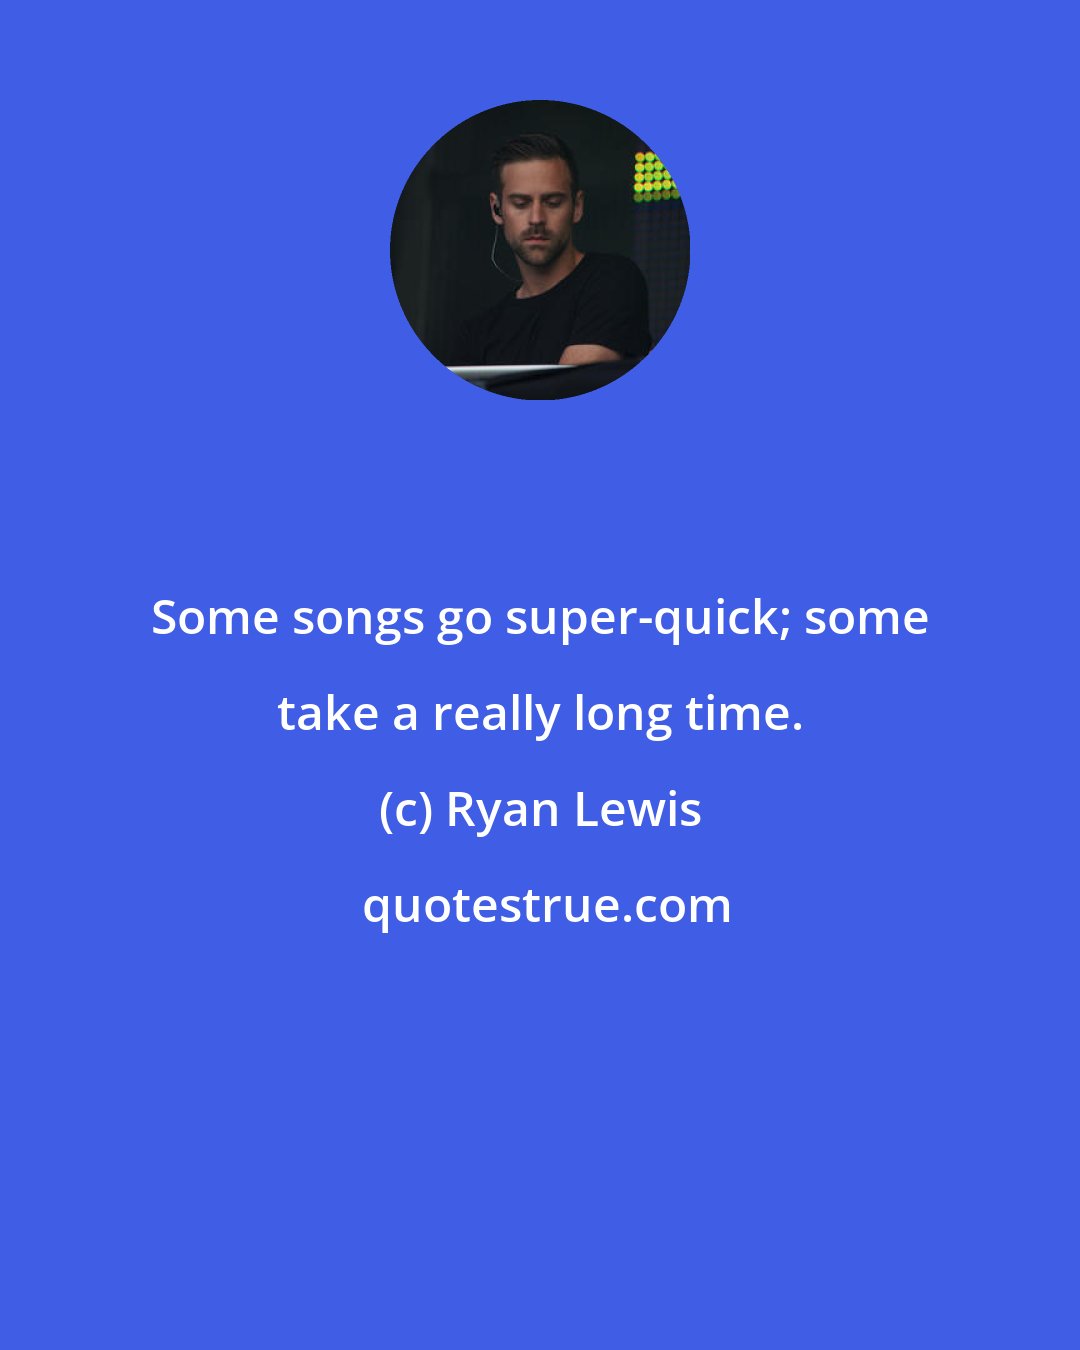 Ryan Lewis: Some songs go super-quick; some take a really long time.